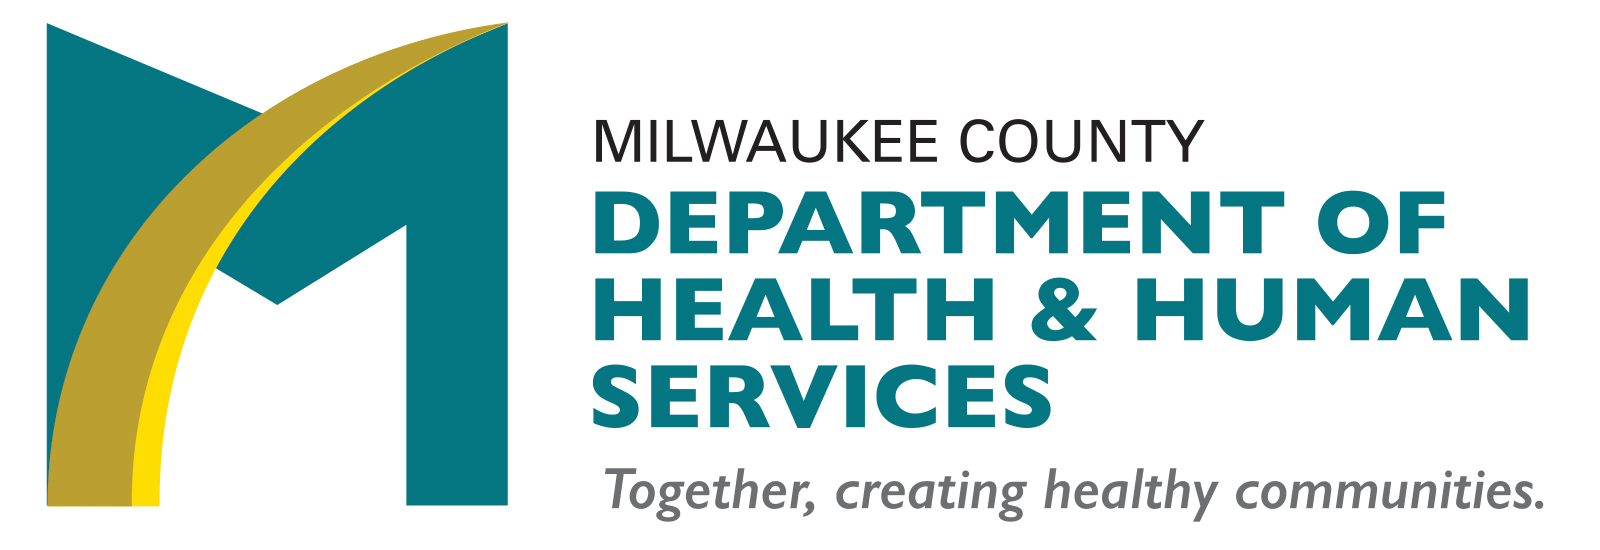 Milwaukee County Department of Health and Human Services